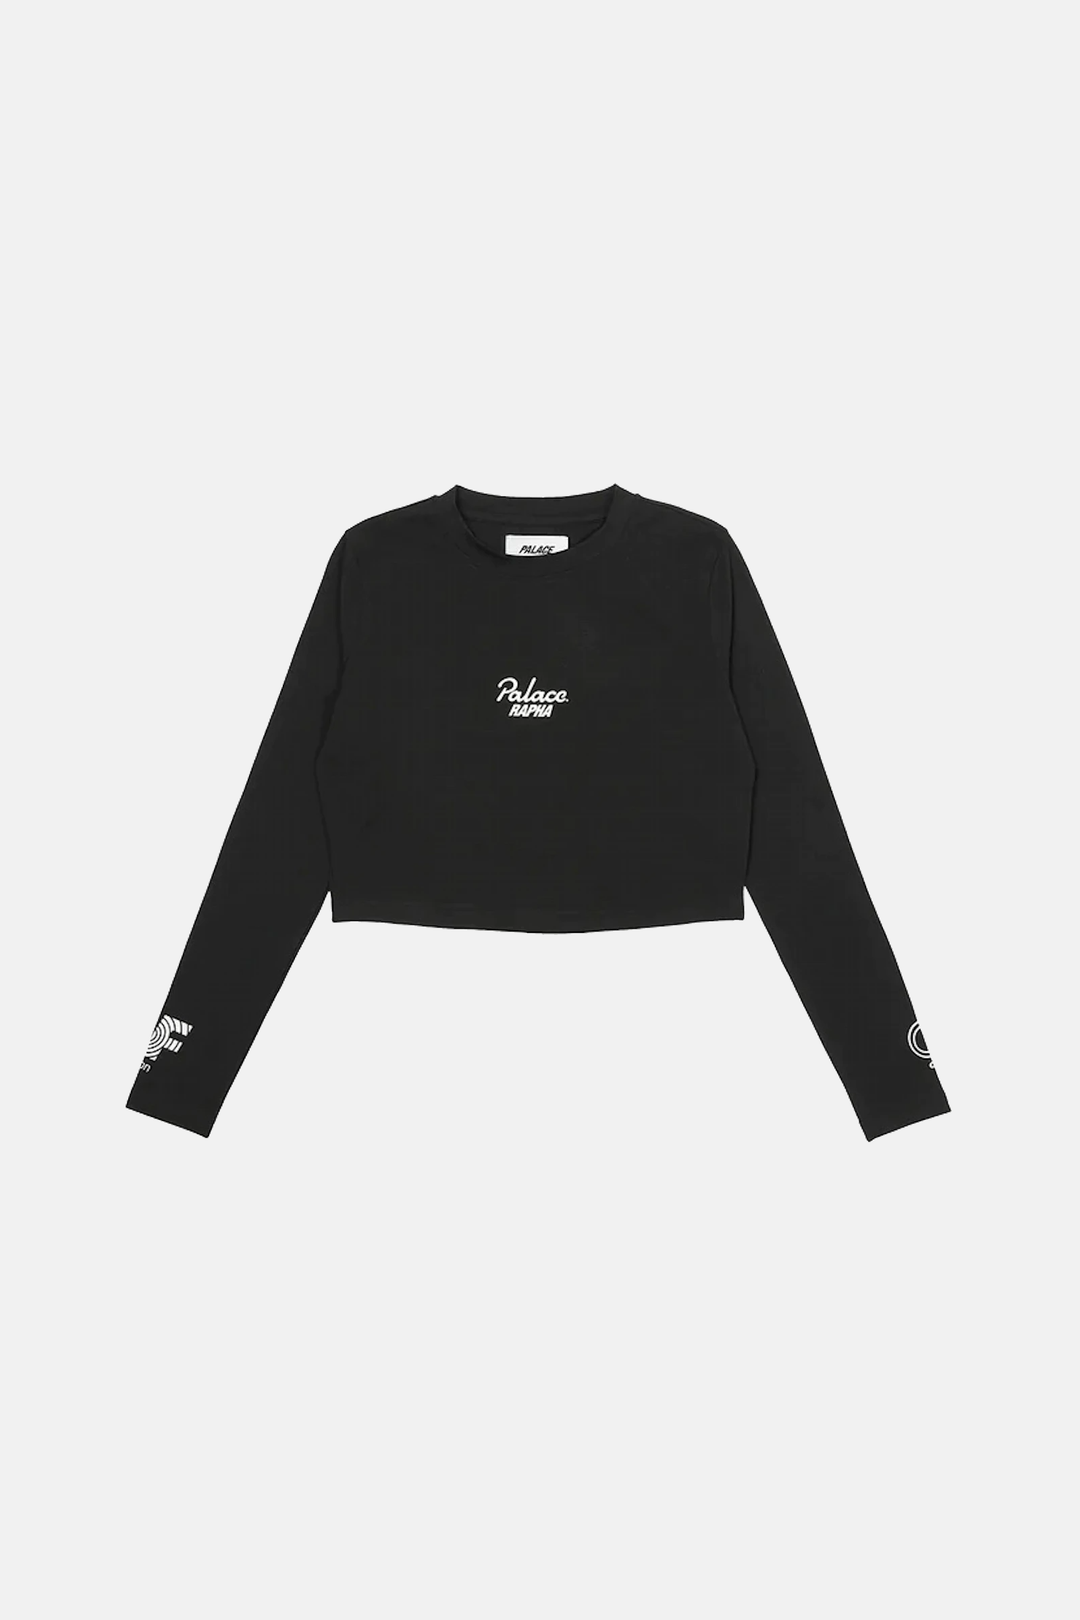 Palace Education First Cropped T-Shirt Black - blueandcream